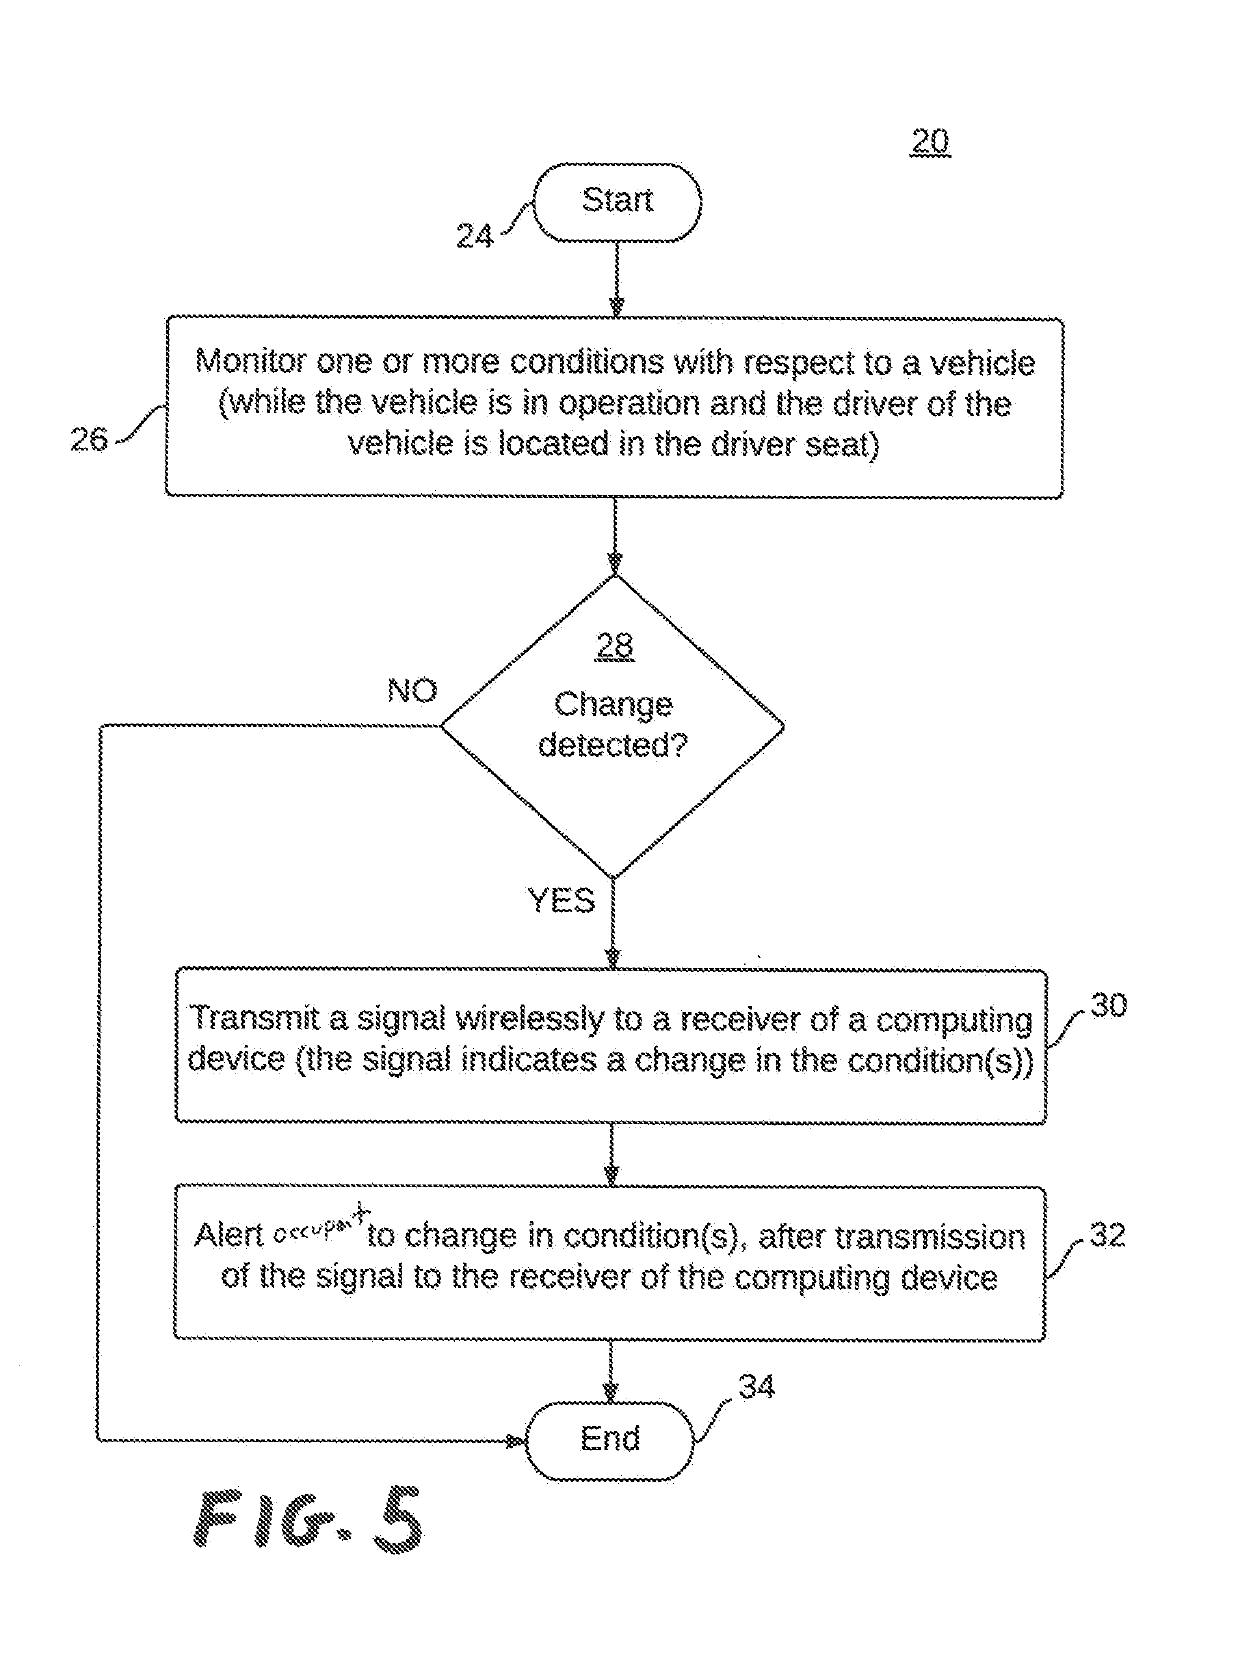 Method and System for Gauging External Object Movement and Conditions for Connected and Autonomous Vehicle Safety